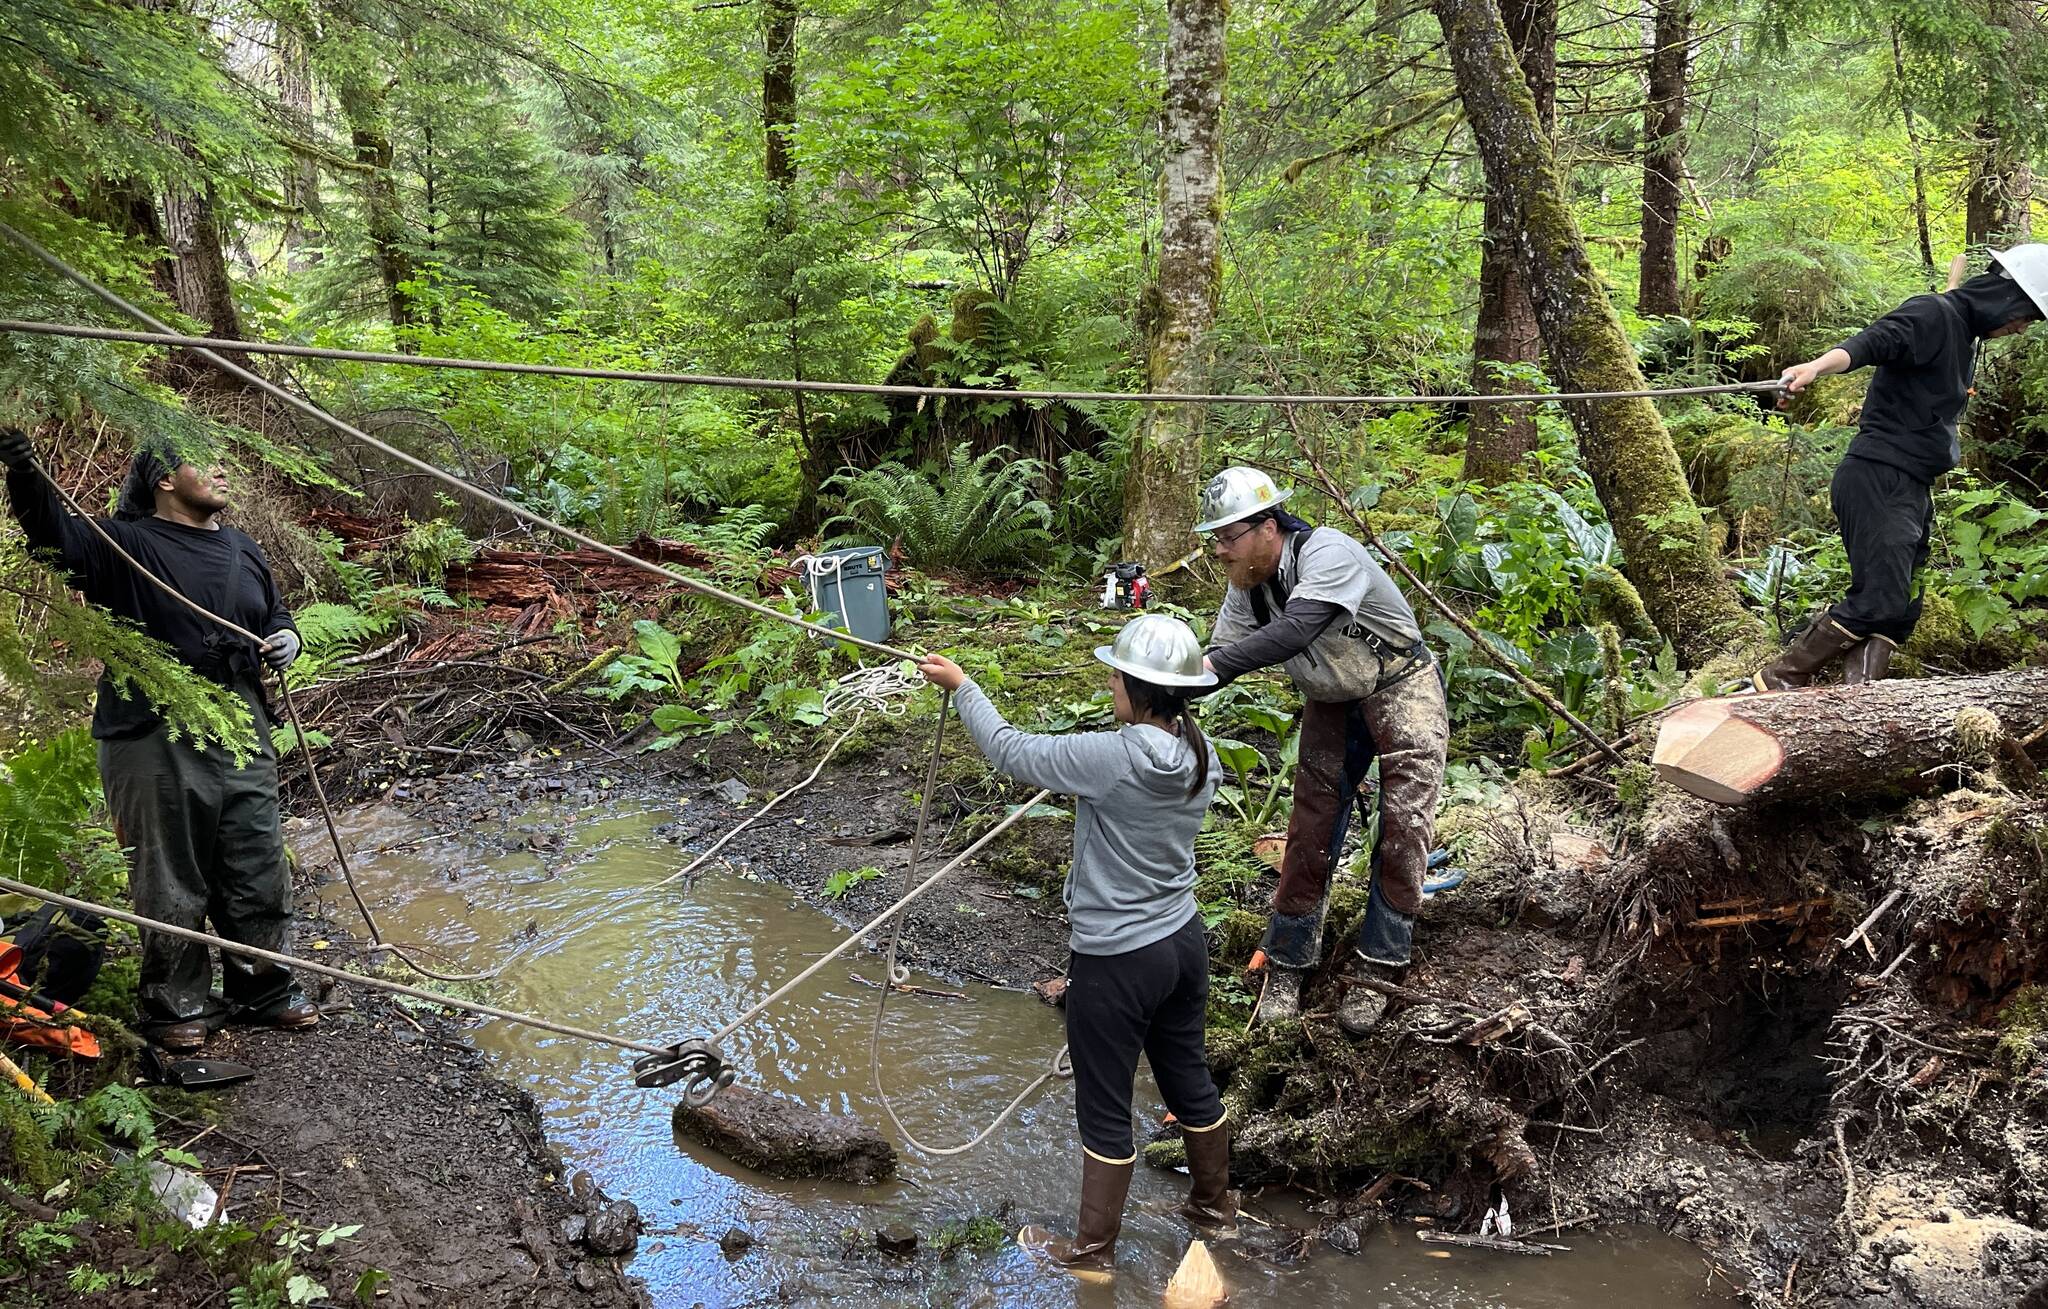 Caption: AYS students Allison Mills and Ricardo Sanches help Quinn Aboudara rig a system to haul a log into 2.5 Mile Creek as a part of the crew’s stream restoration work (Courtesy Photo / John Hudson, SAWC)